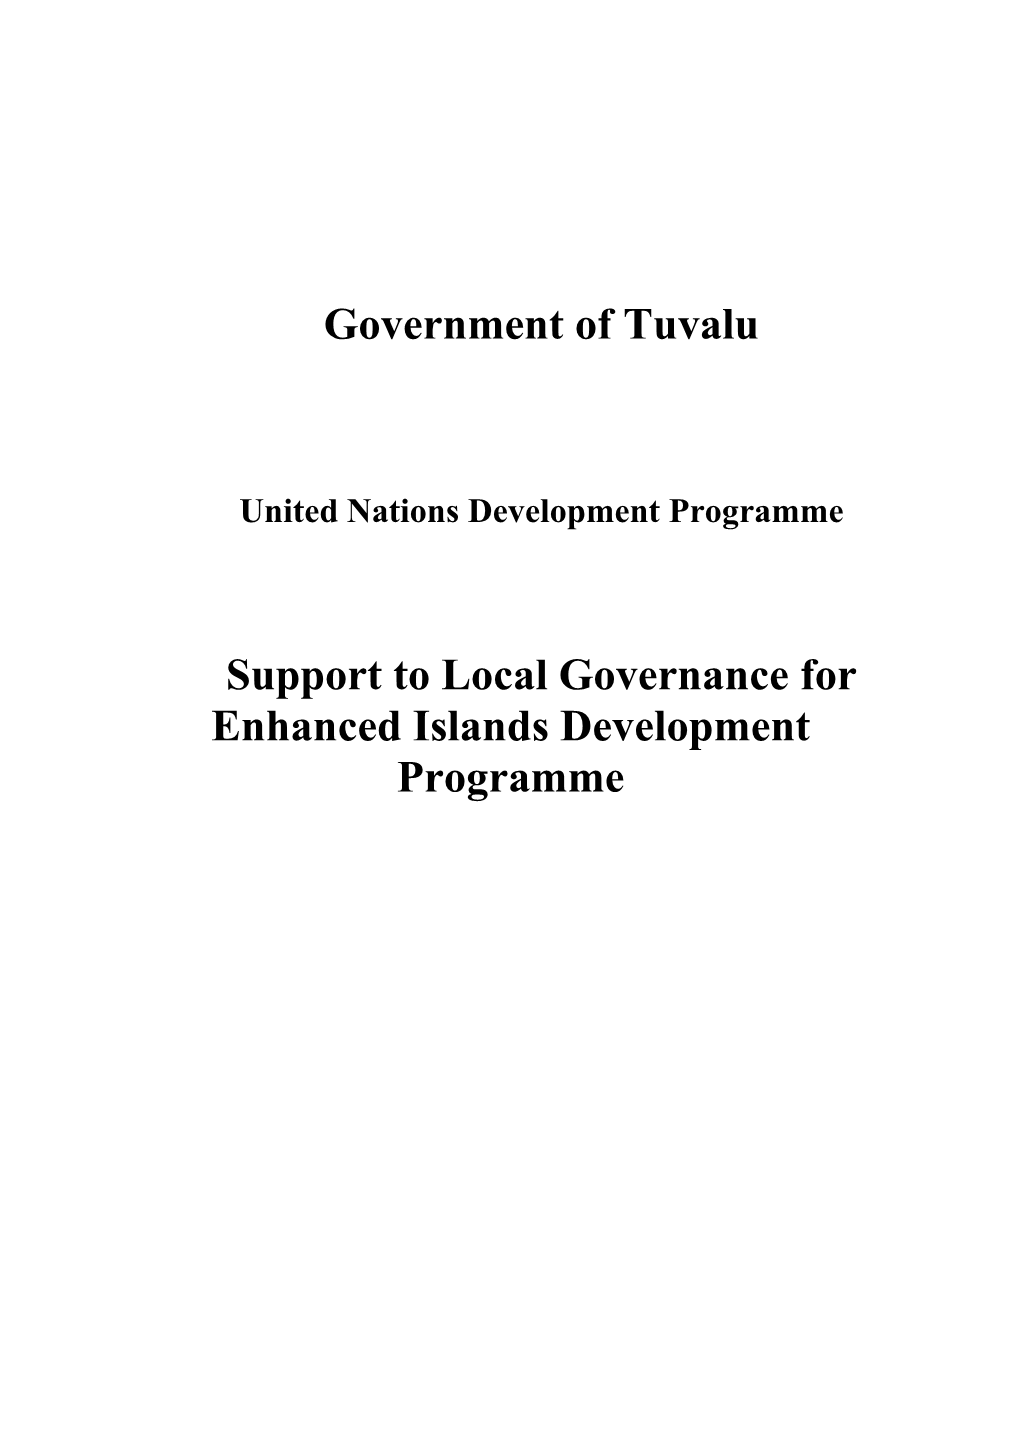 Support to Local Governance for Enhanced Islands Development Programme